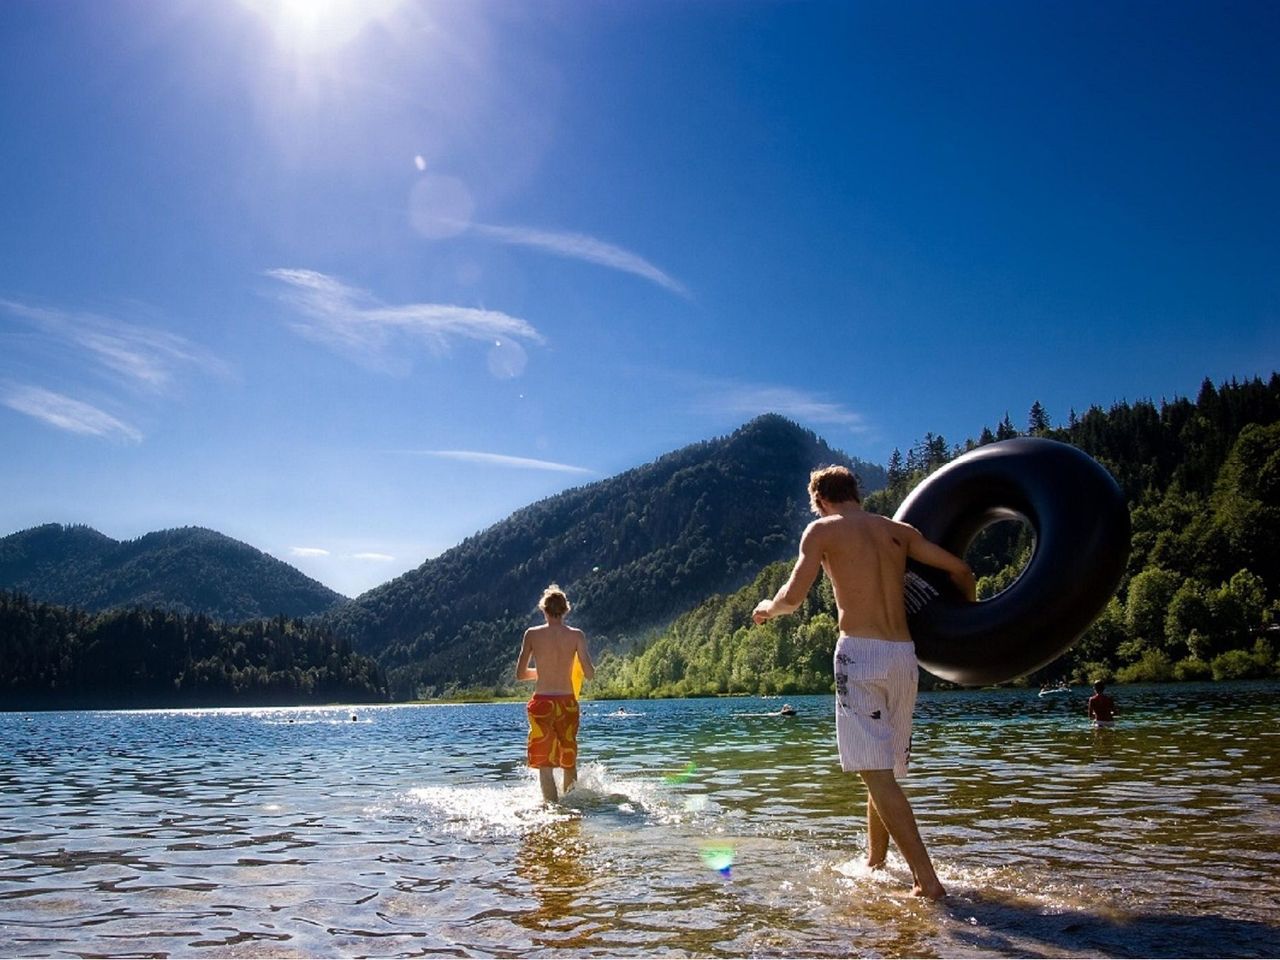 Erholung pur! 5 Tage Ruhpolding mit Therme & Massage